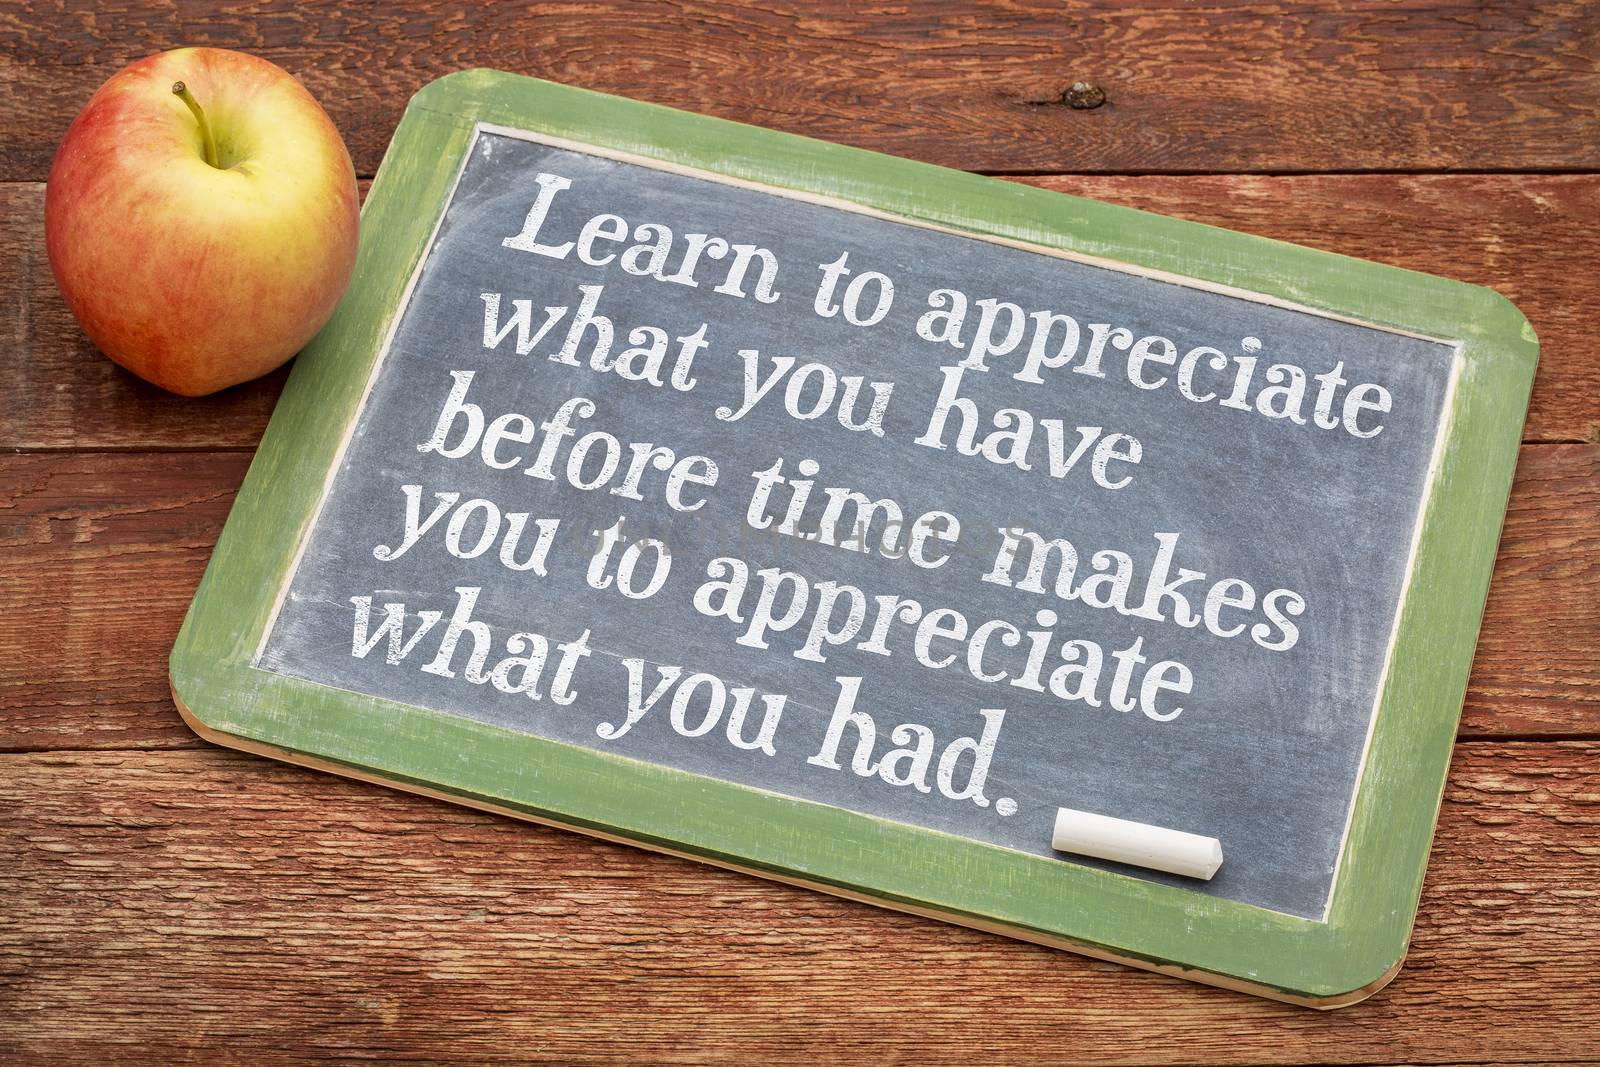 Learn to appreciate what you have before time makes you appreciate what you had - inspirational phrase on a slate blackboard against red barn wood